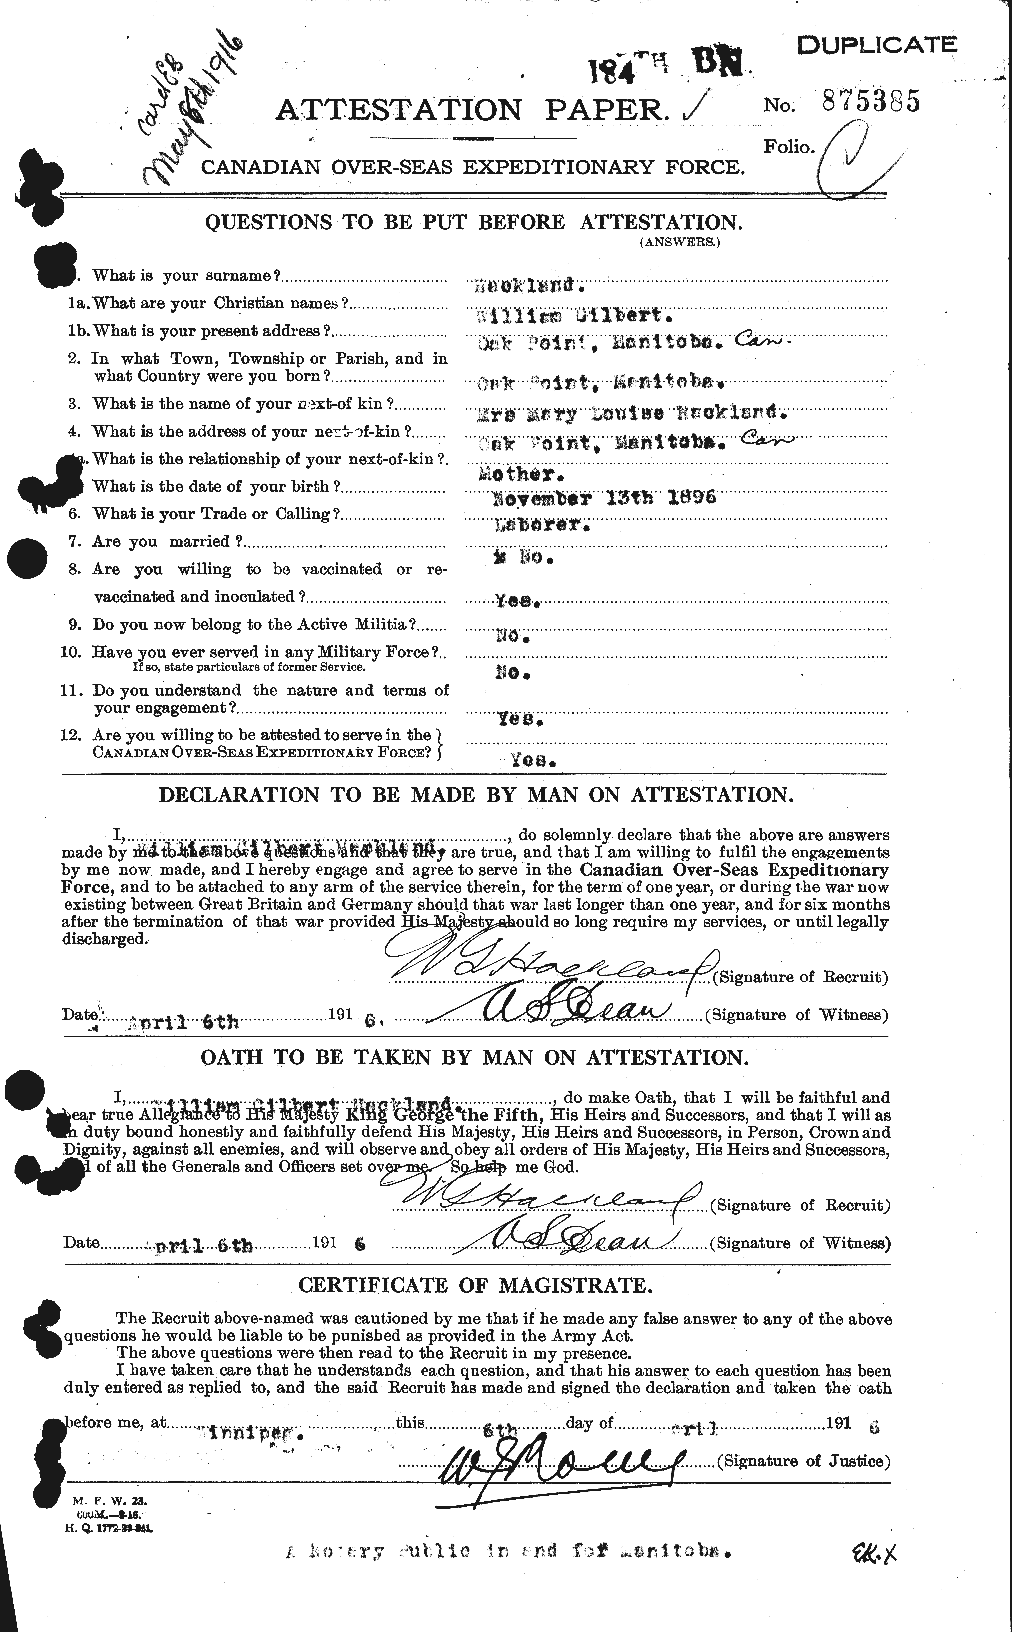 Personnel Records of the First World War - CEF 368625a